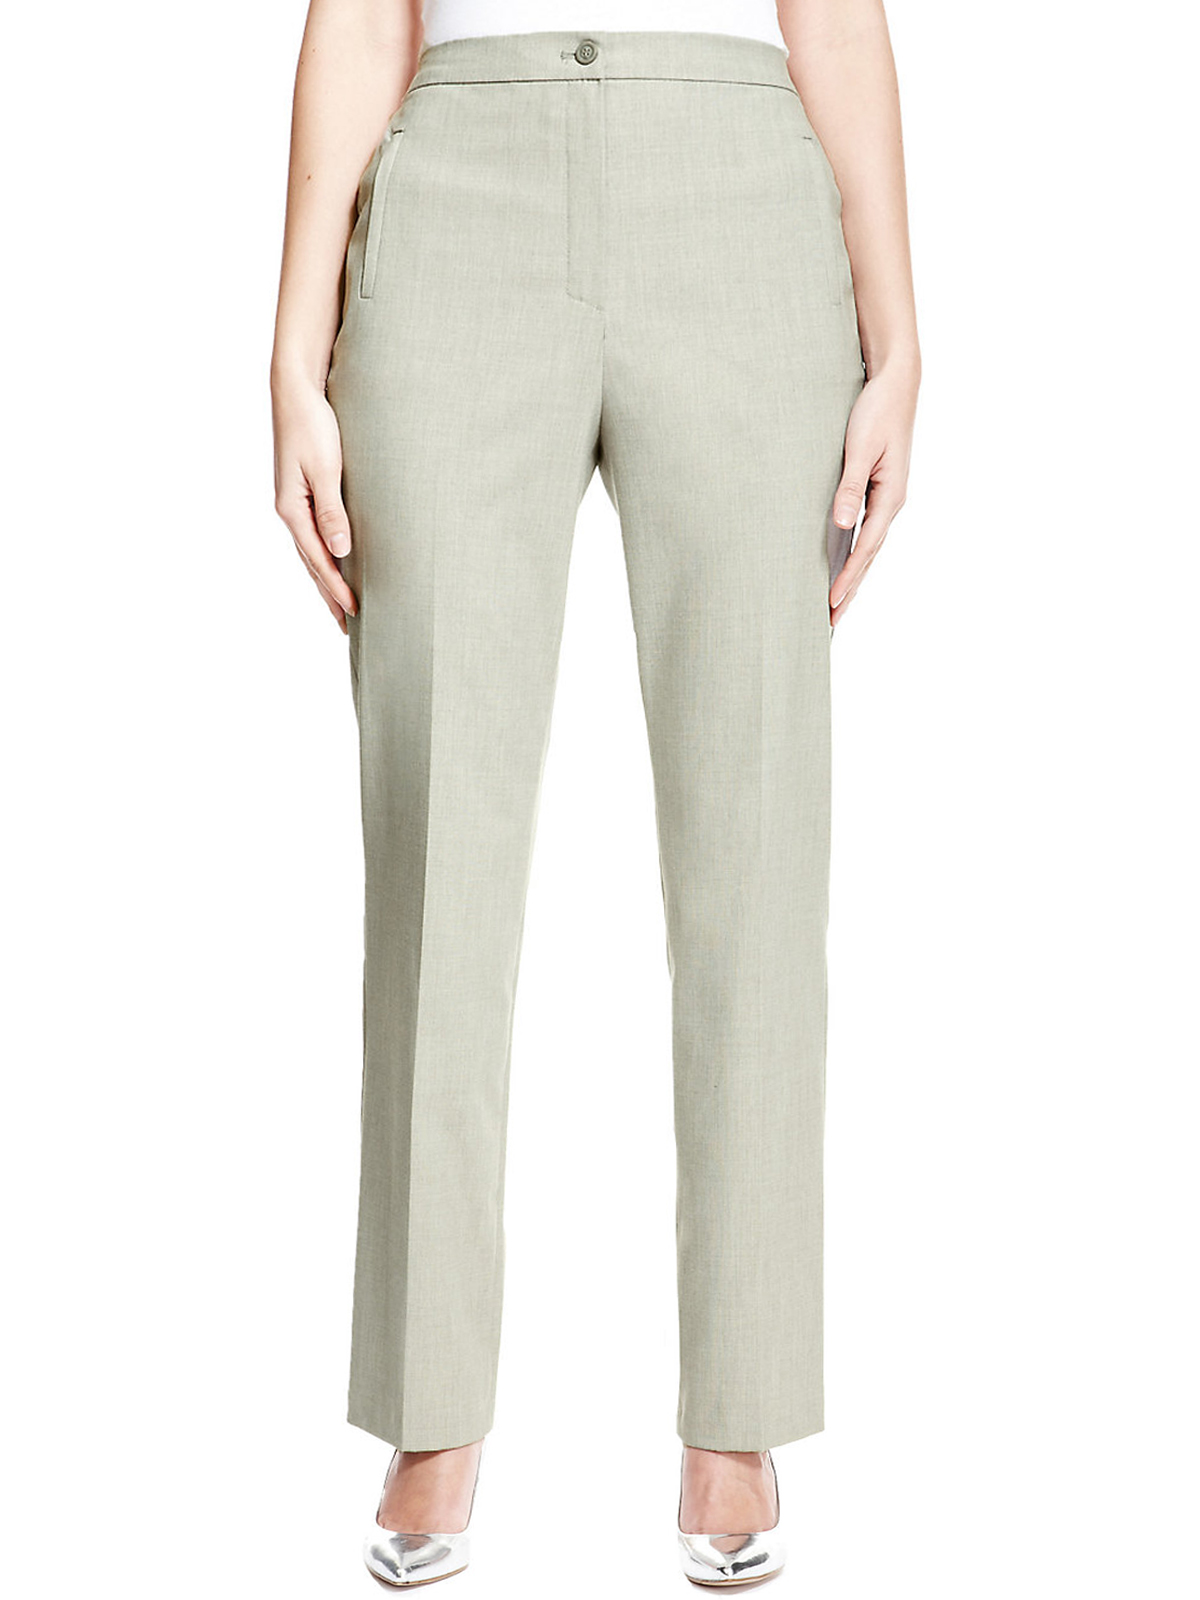 Marks and Spencer - - M&5 LIGHT-GREY Slim Leg Zipped Trousers - Size 20 ...